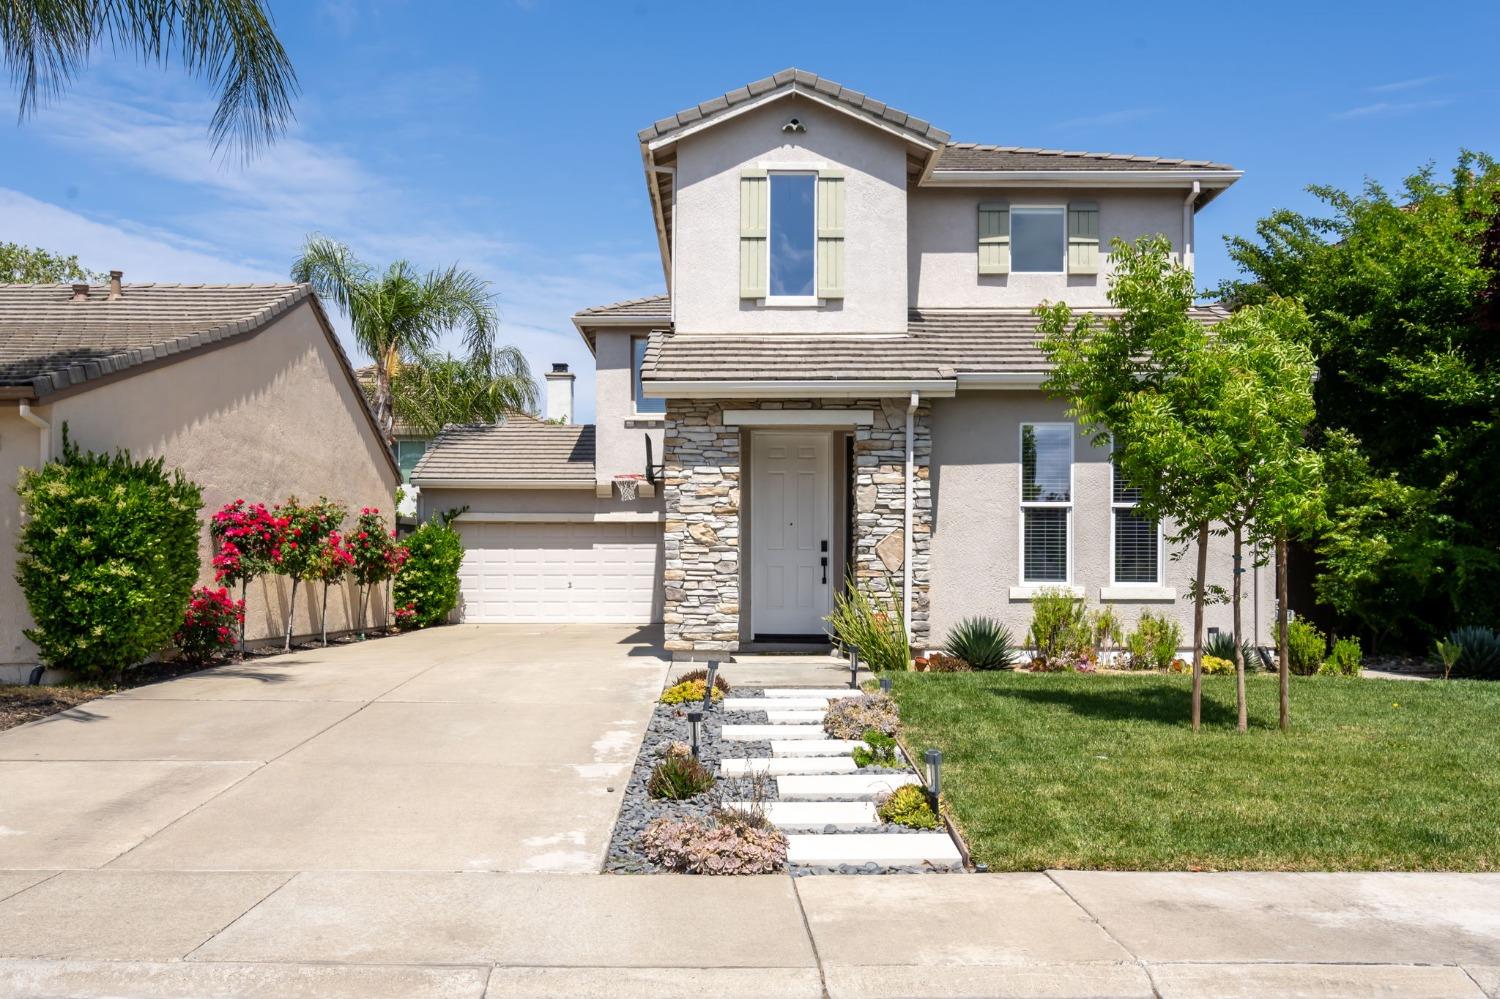 NEW PRICE!!! This Natomas Park beauty is everything you've been waiting for! 4 bed, 3 bath, 2209 sq 